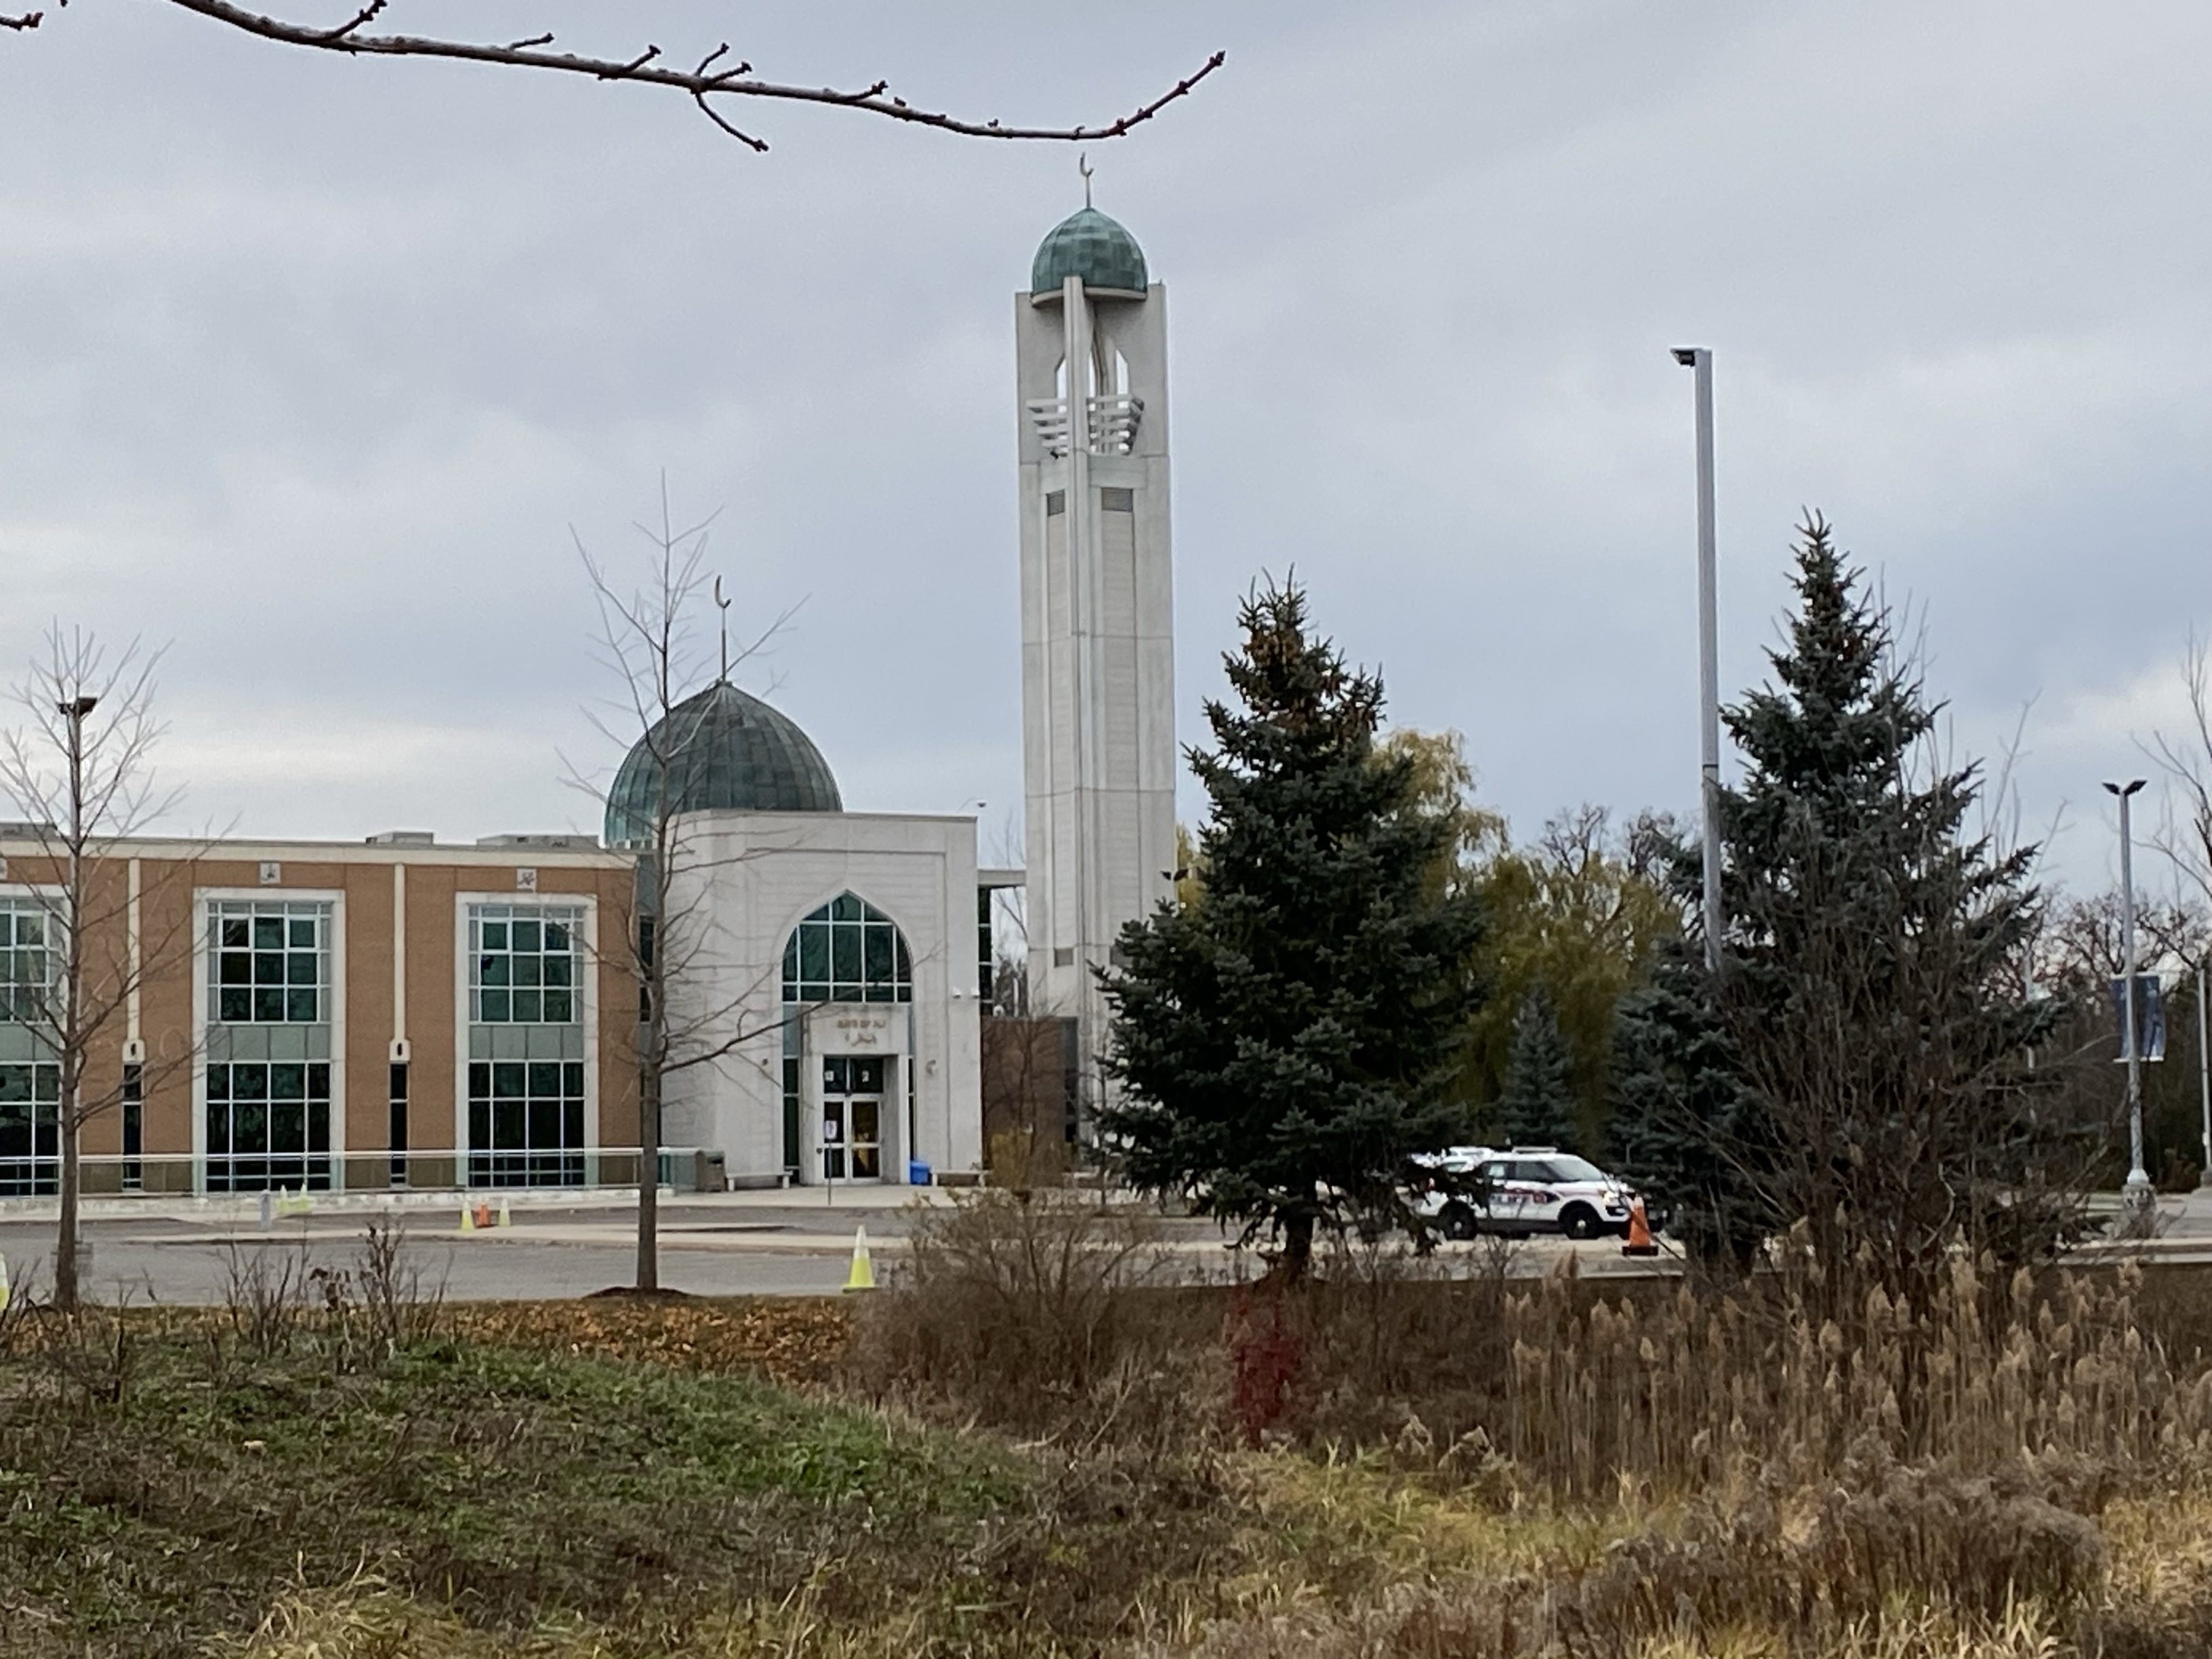 Potential bomb threat causes evacuation at Islamic community centre in Vaughan